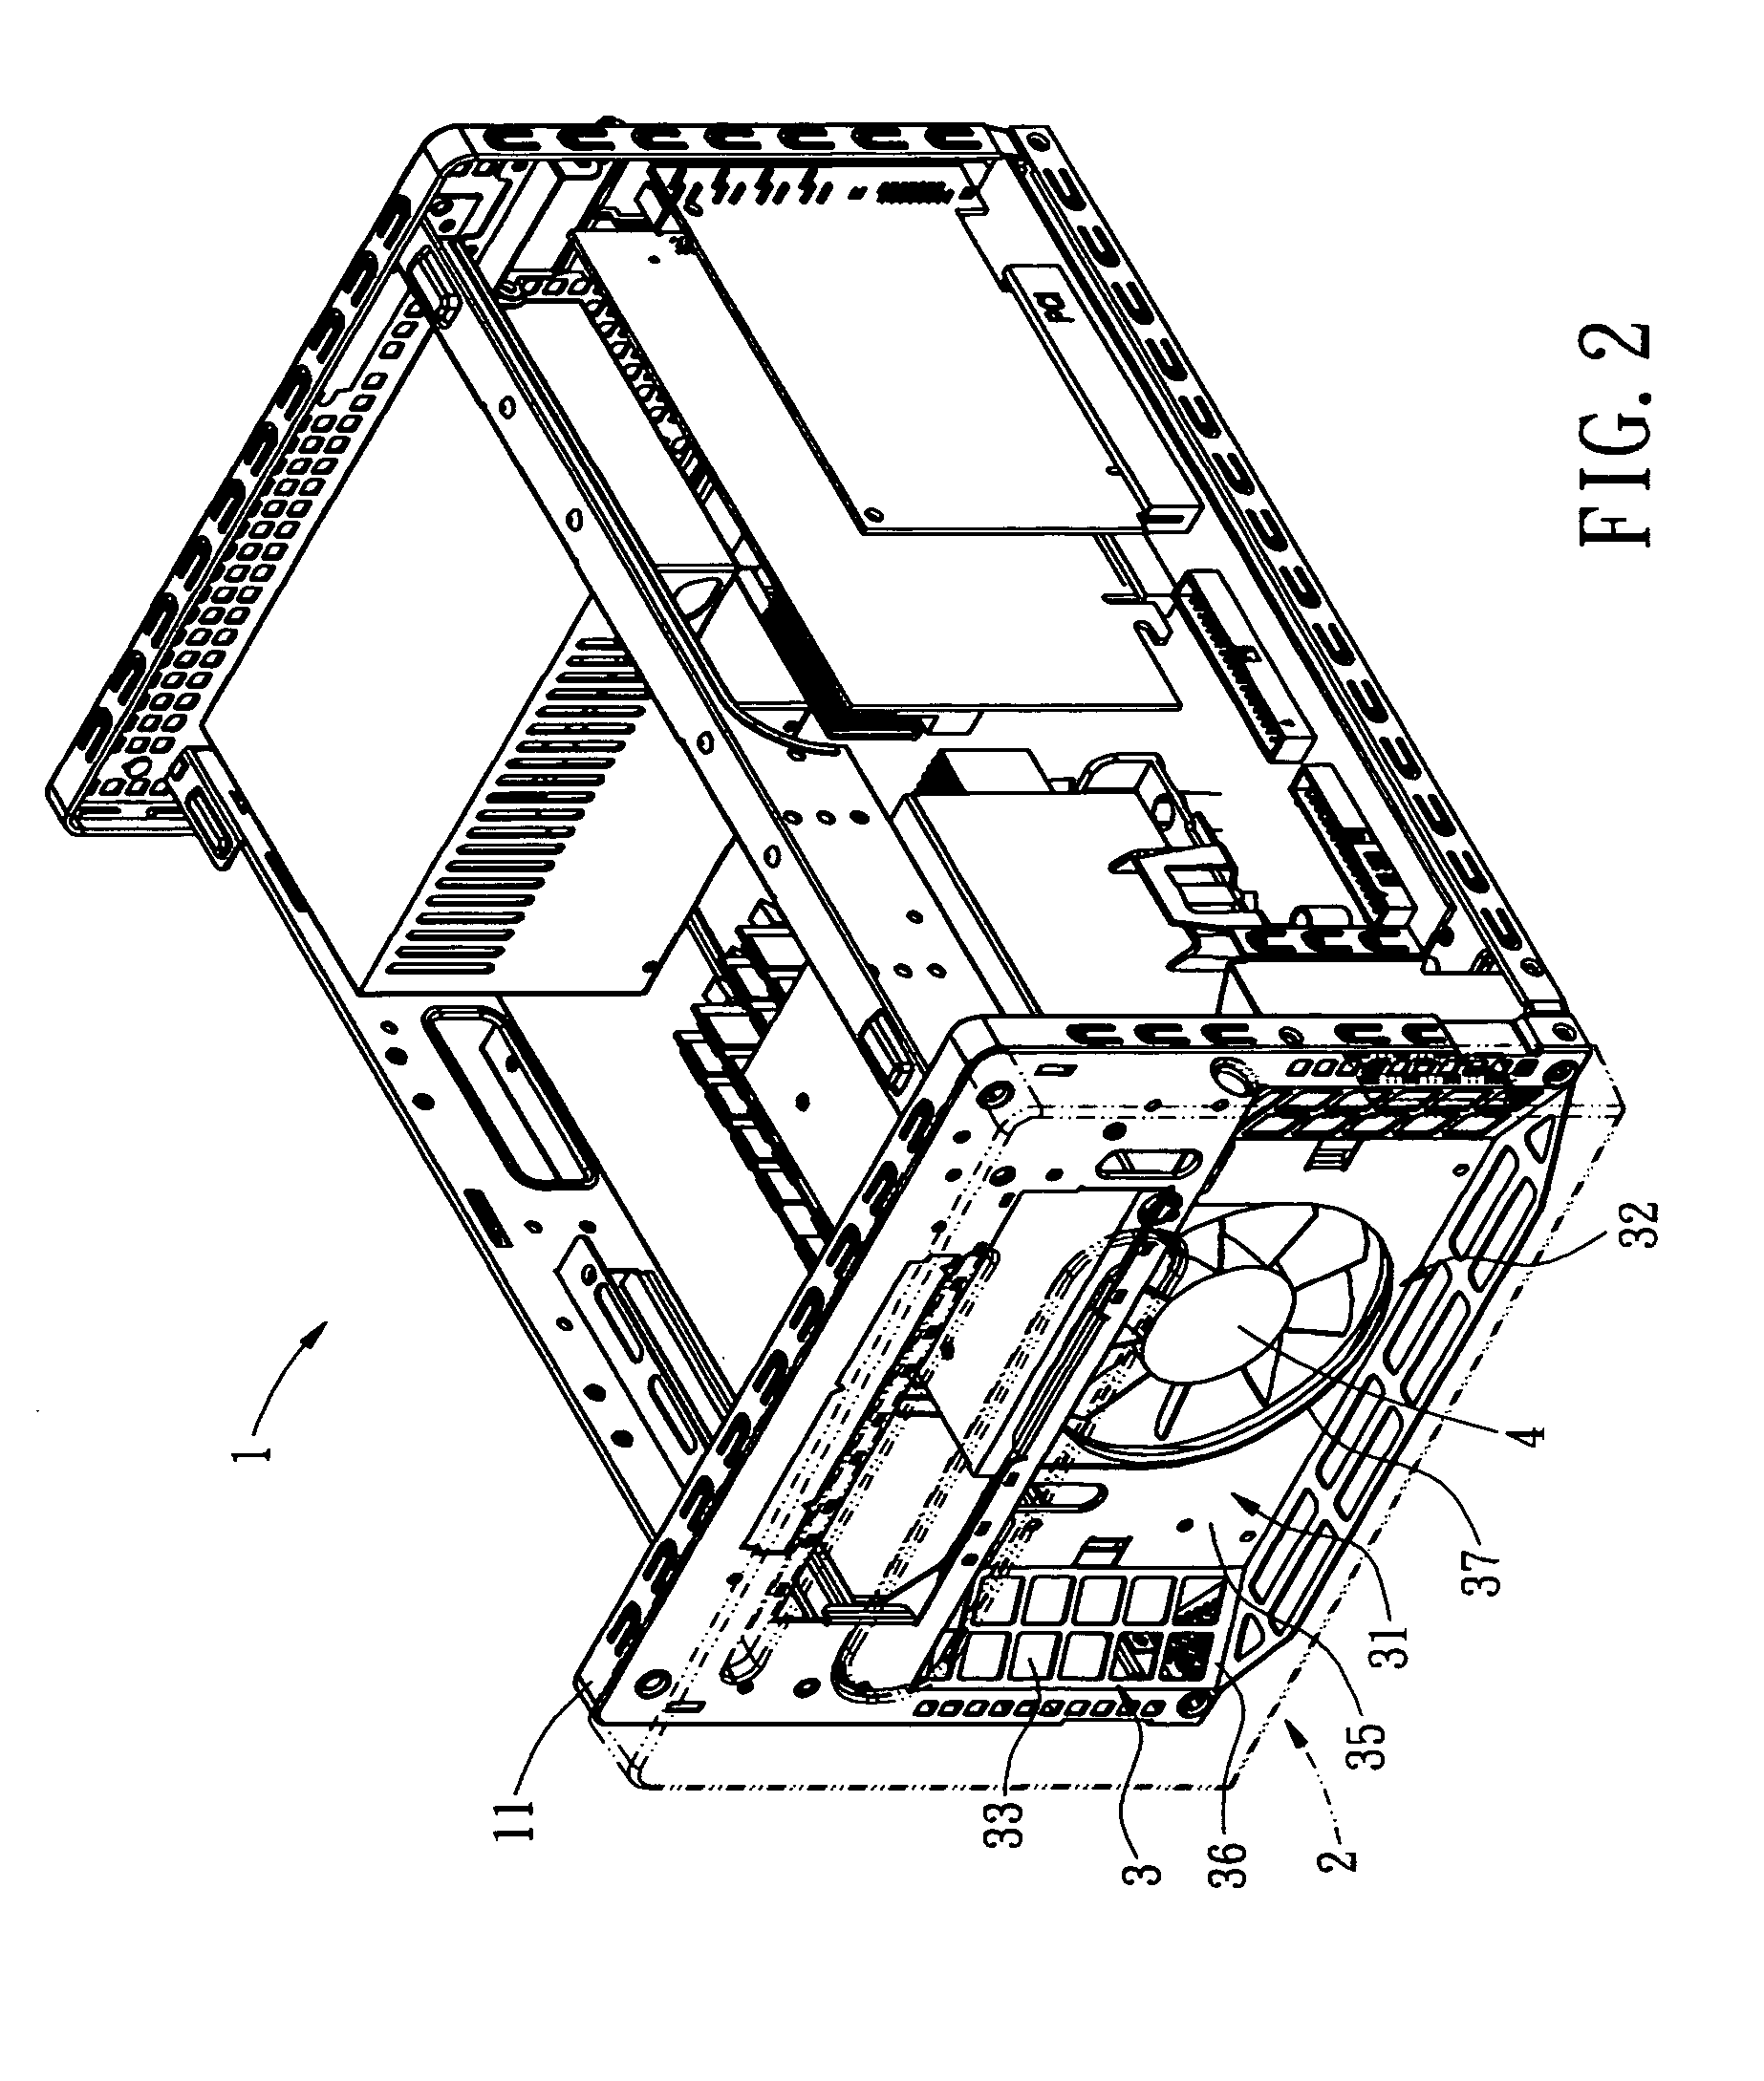 Inlet airflow guiding structure for computers